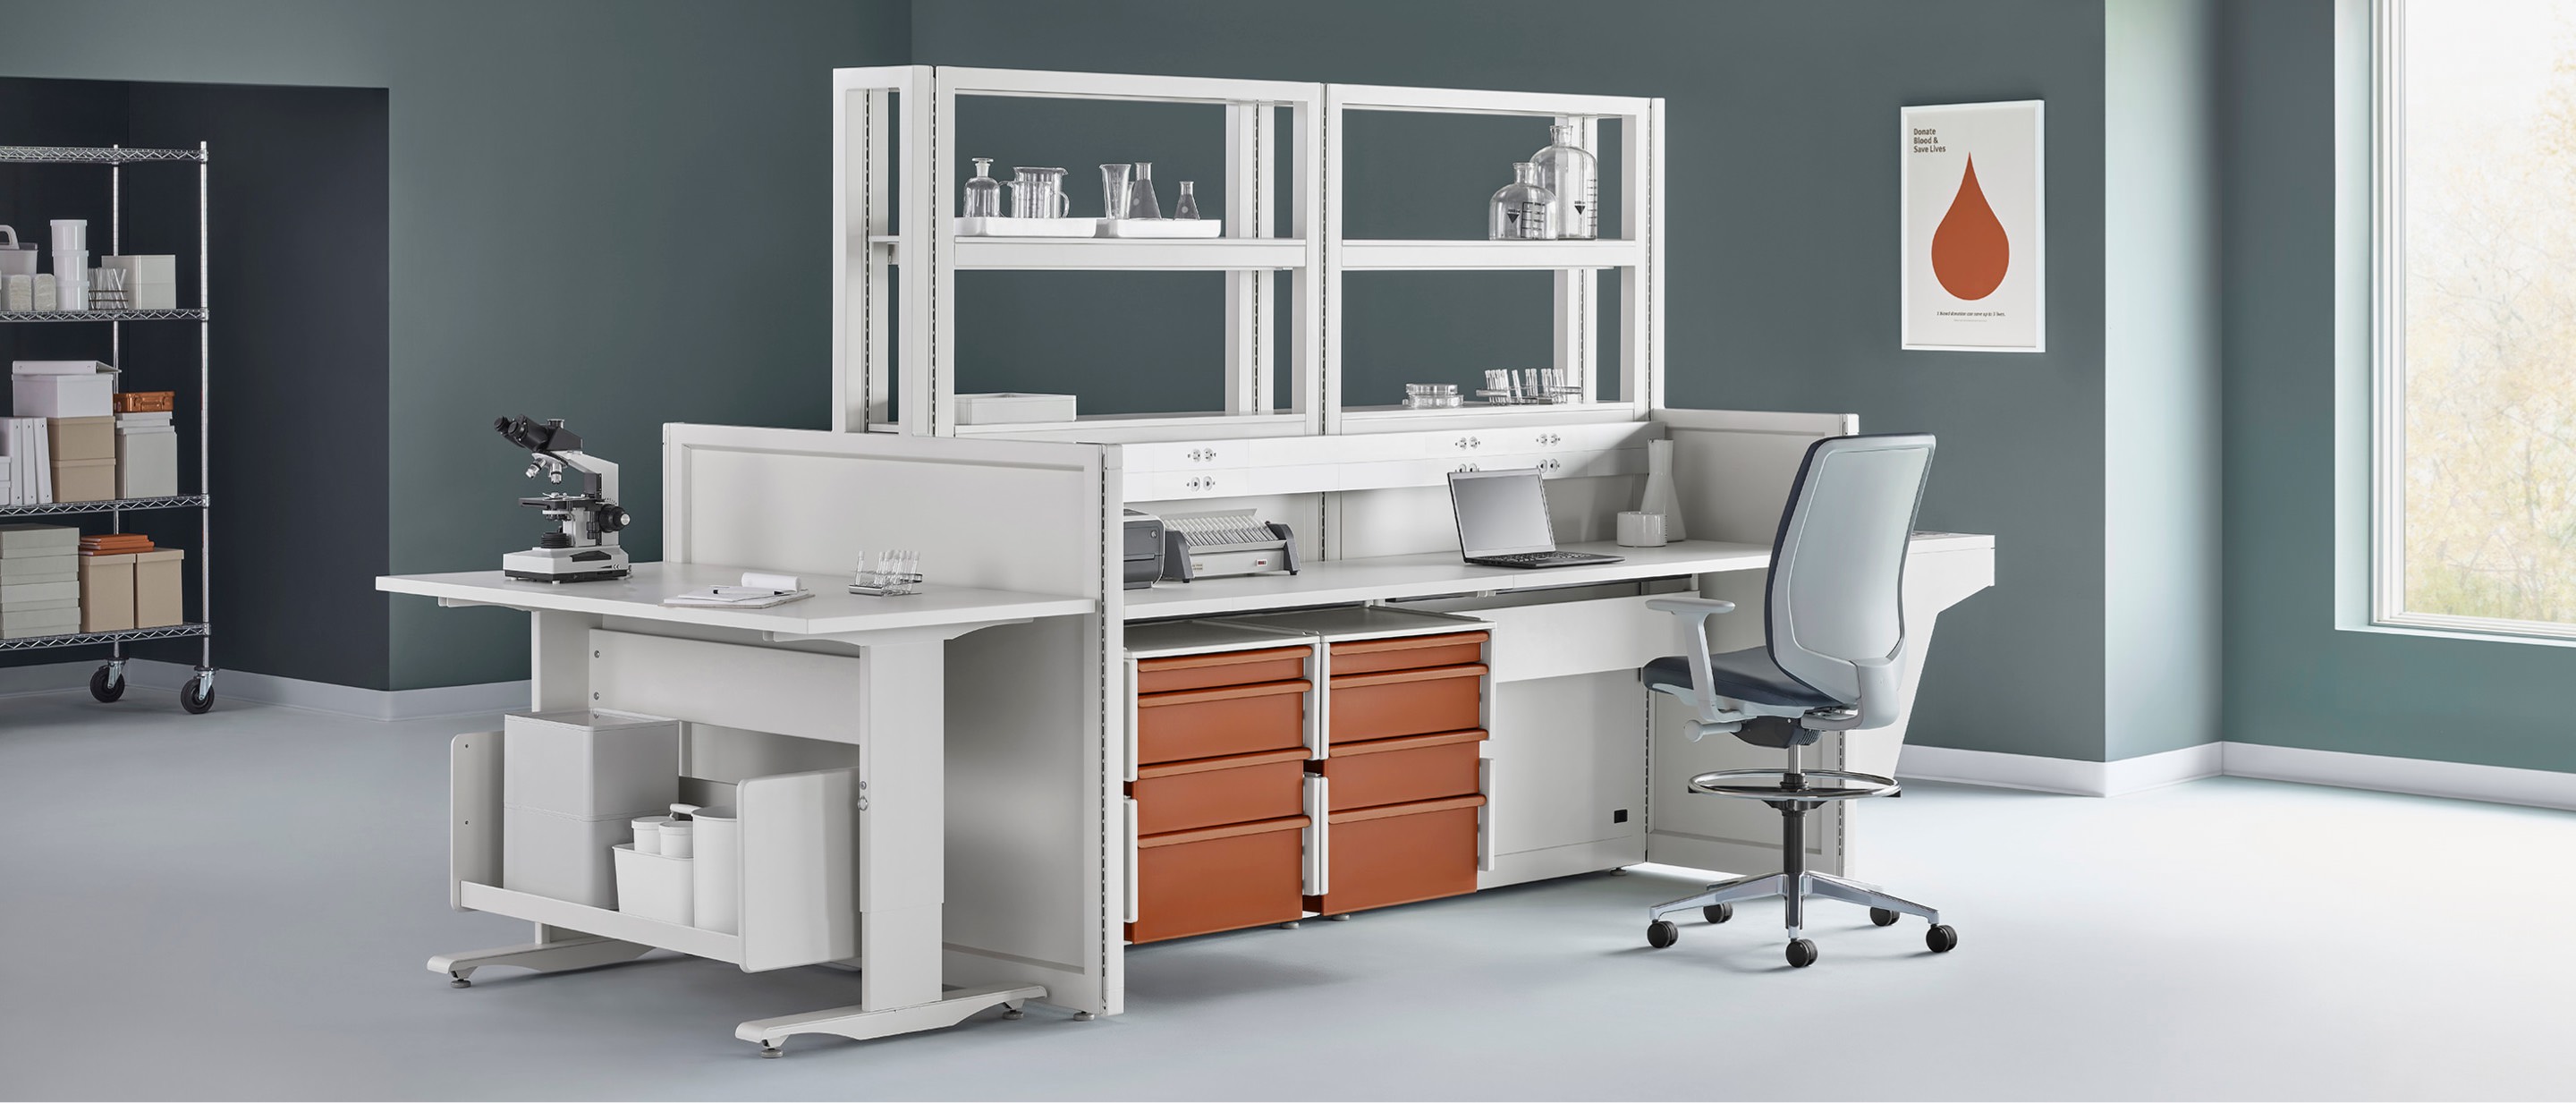 A lab setting with a Co/Struc System workstation and shelving in the center with a Verus work stool.